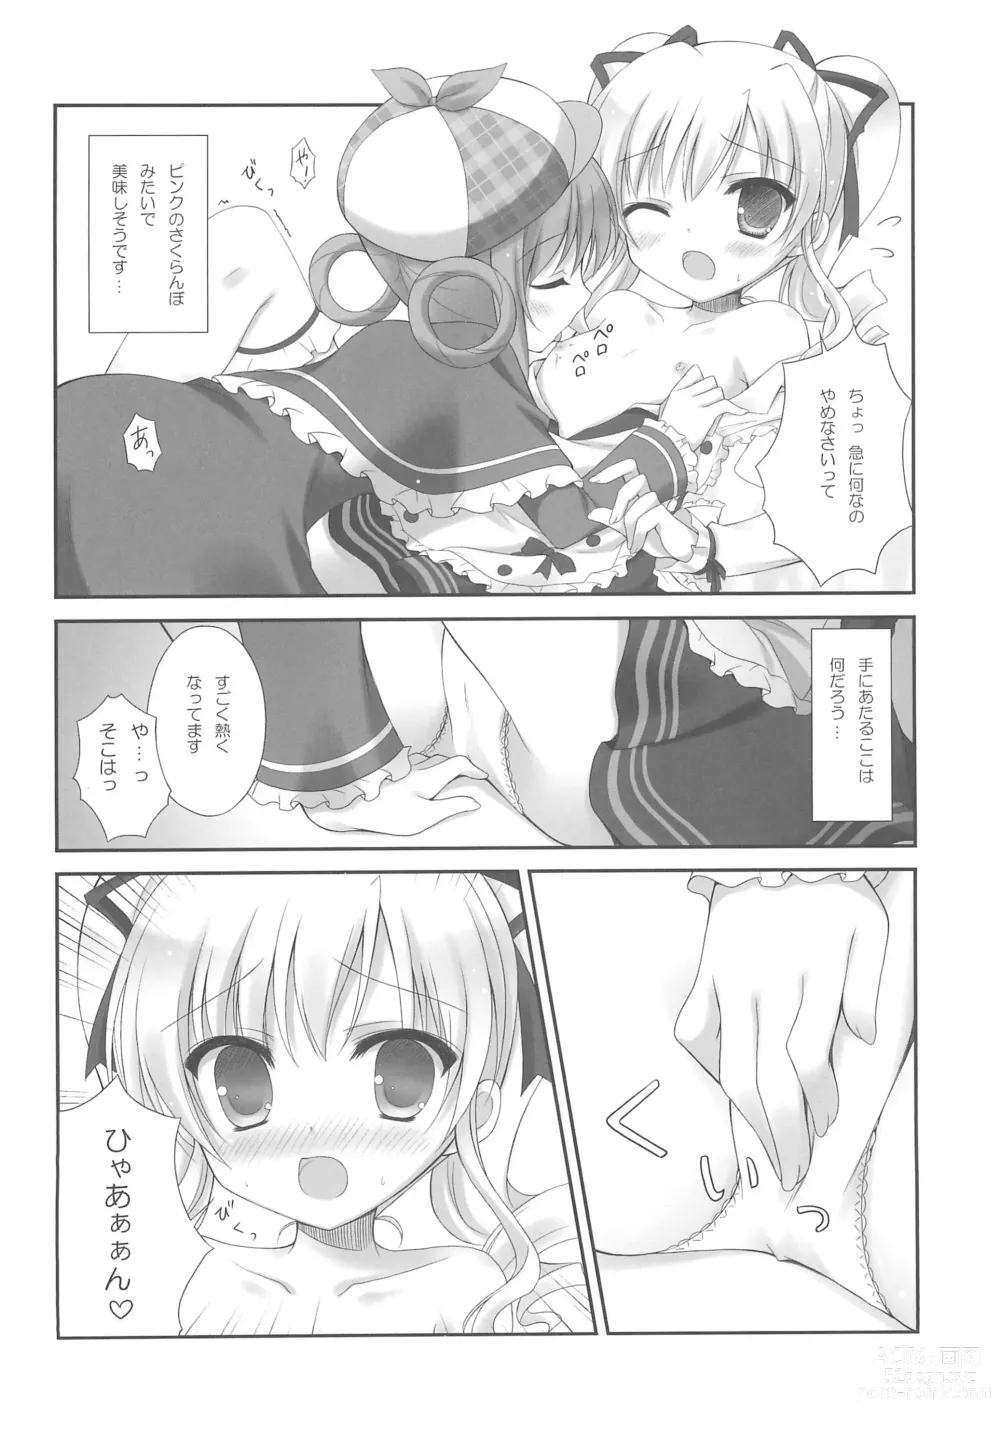 Page 8 of doujinshi Milky Time*